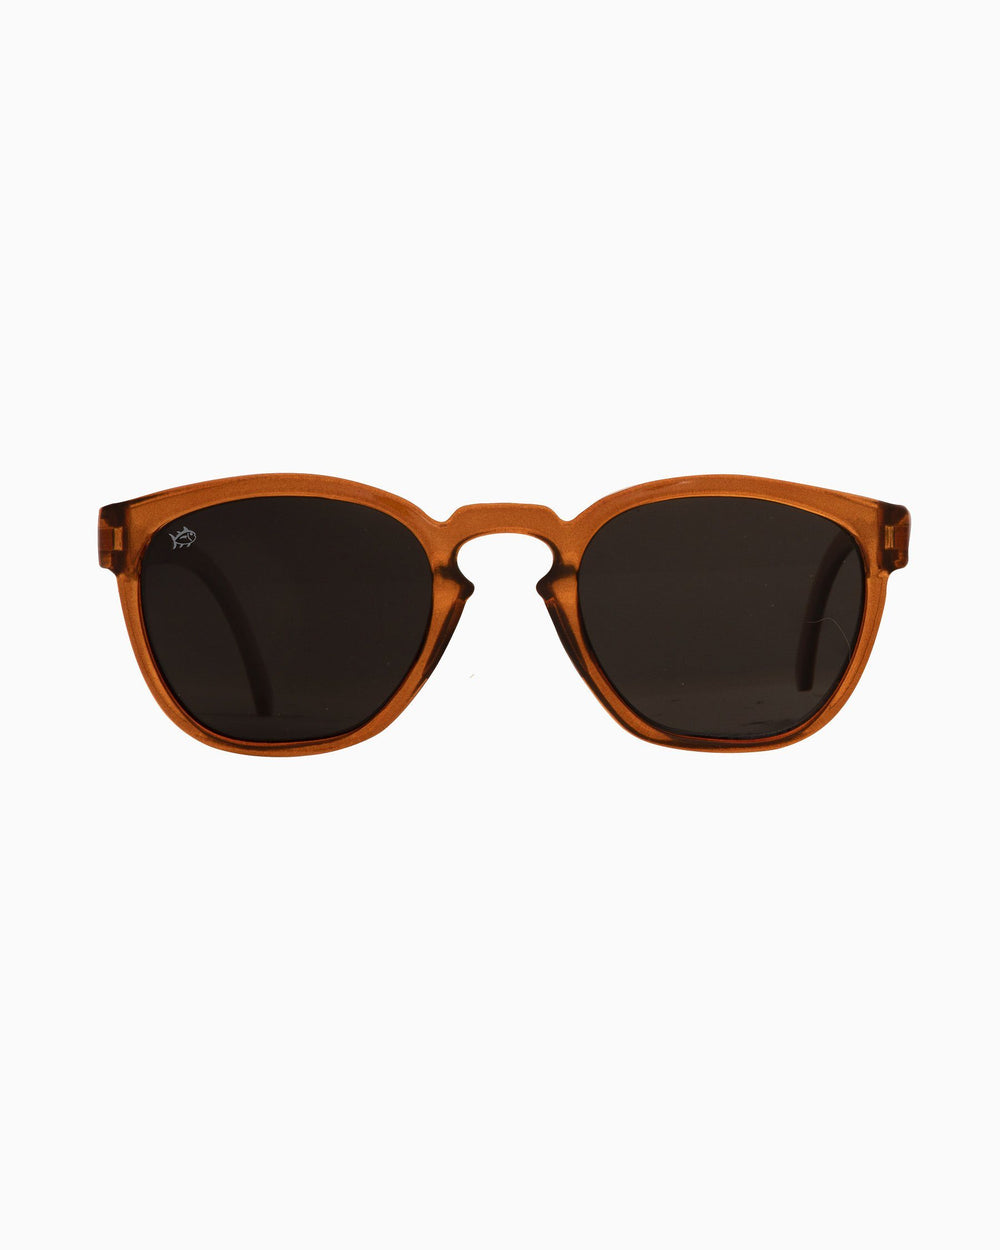 The front of the Rheos Seabrooks Sunglasses by Southern Tide - Sandbar